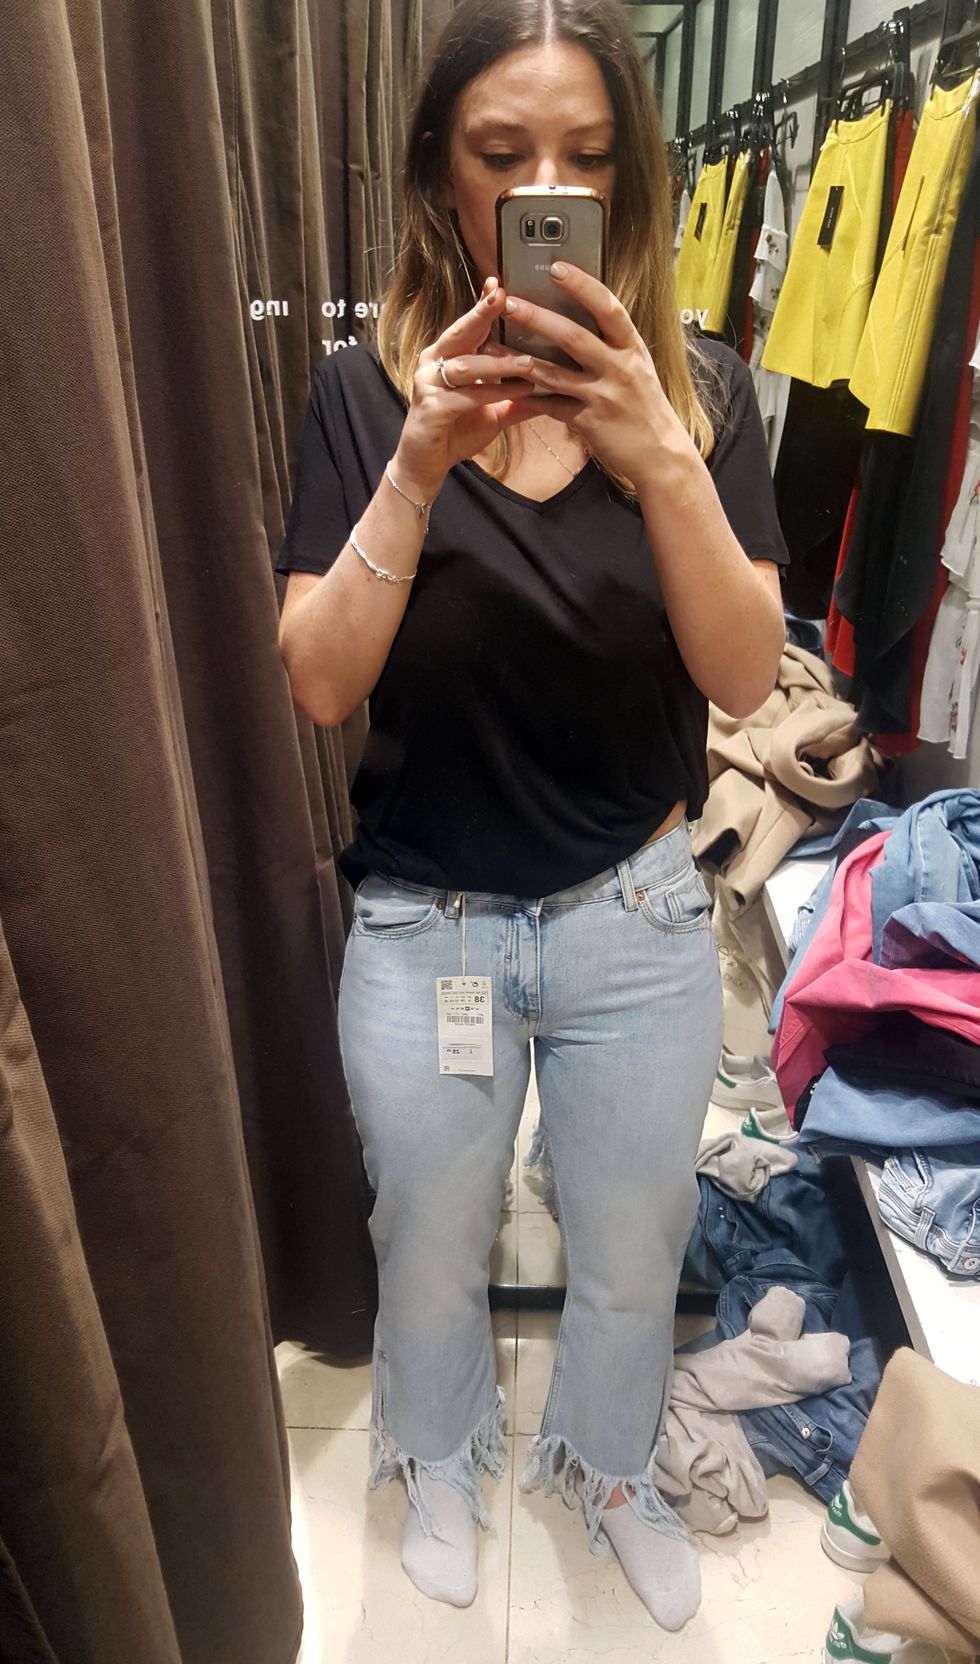 Size XS FLOWING TROUSERS from Zara